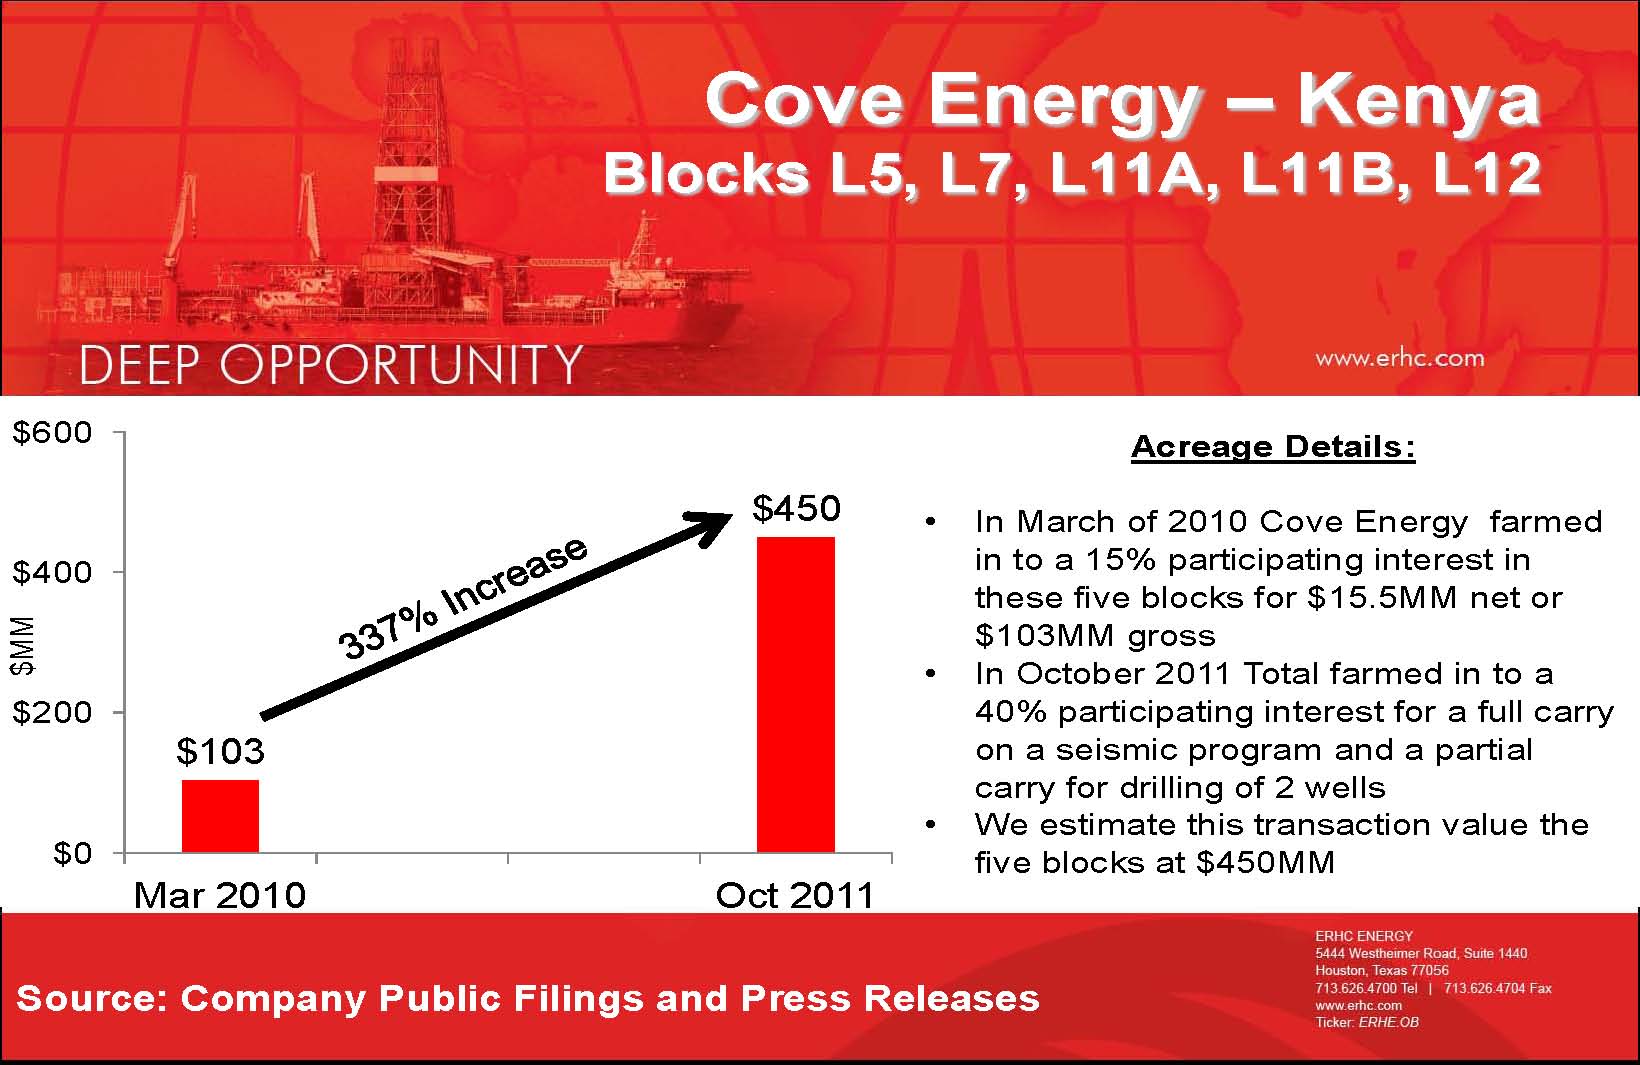 Examples of significant increases in value prior to drilling